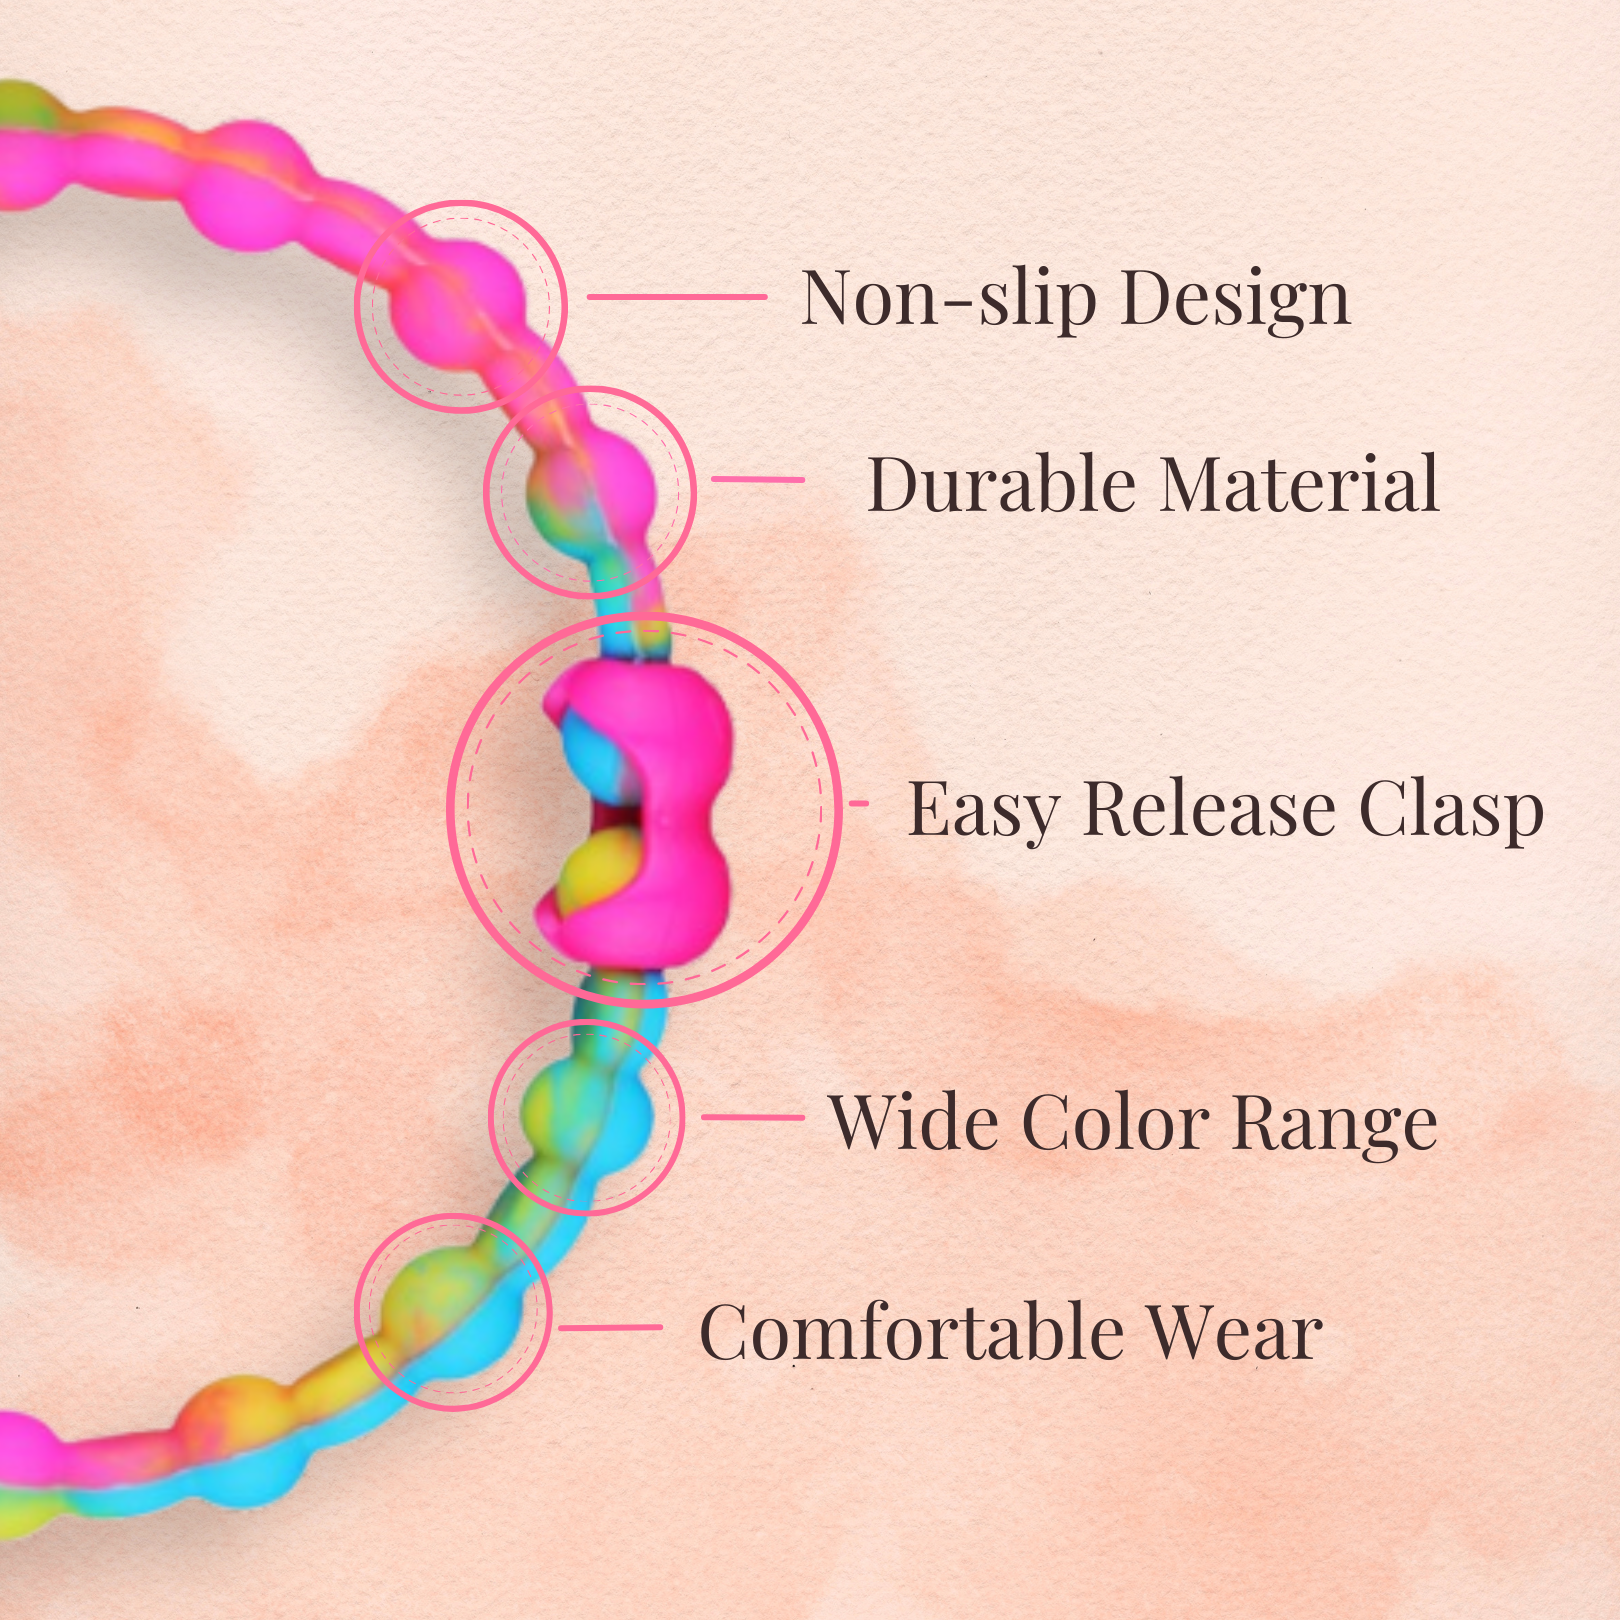 Berry Medley Pack PRO Hair Ties: Easy Release Adjustable for Every Hair Type PACK OF 6